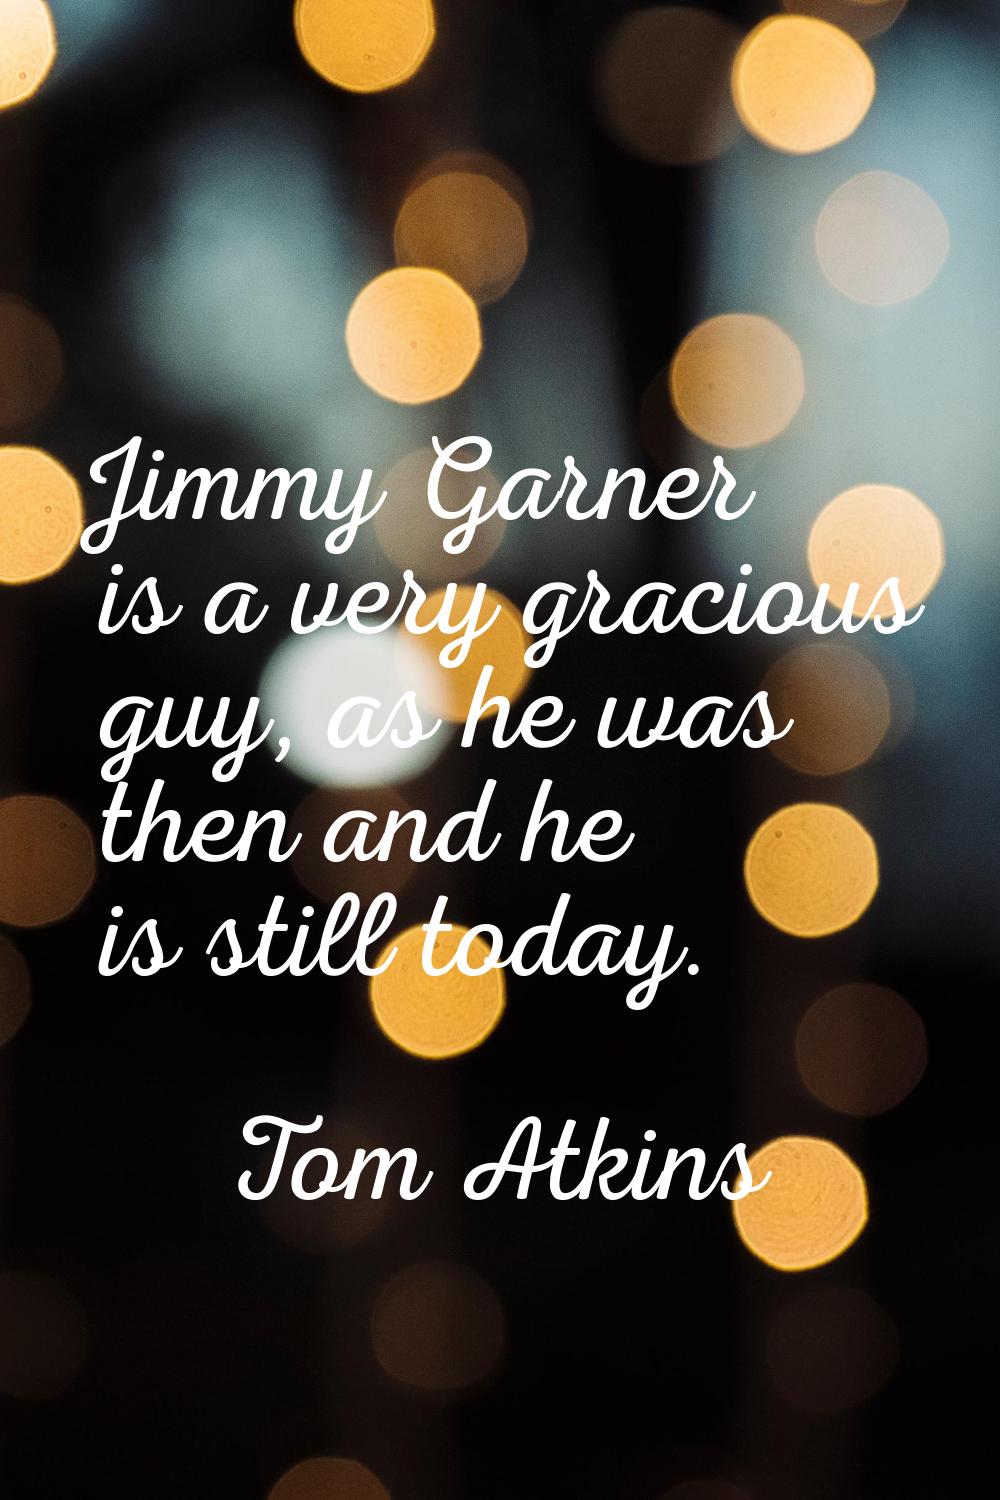 Jimmy Garner is a very gracious guy, as he was then and he is still today.